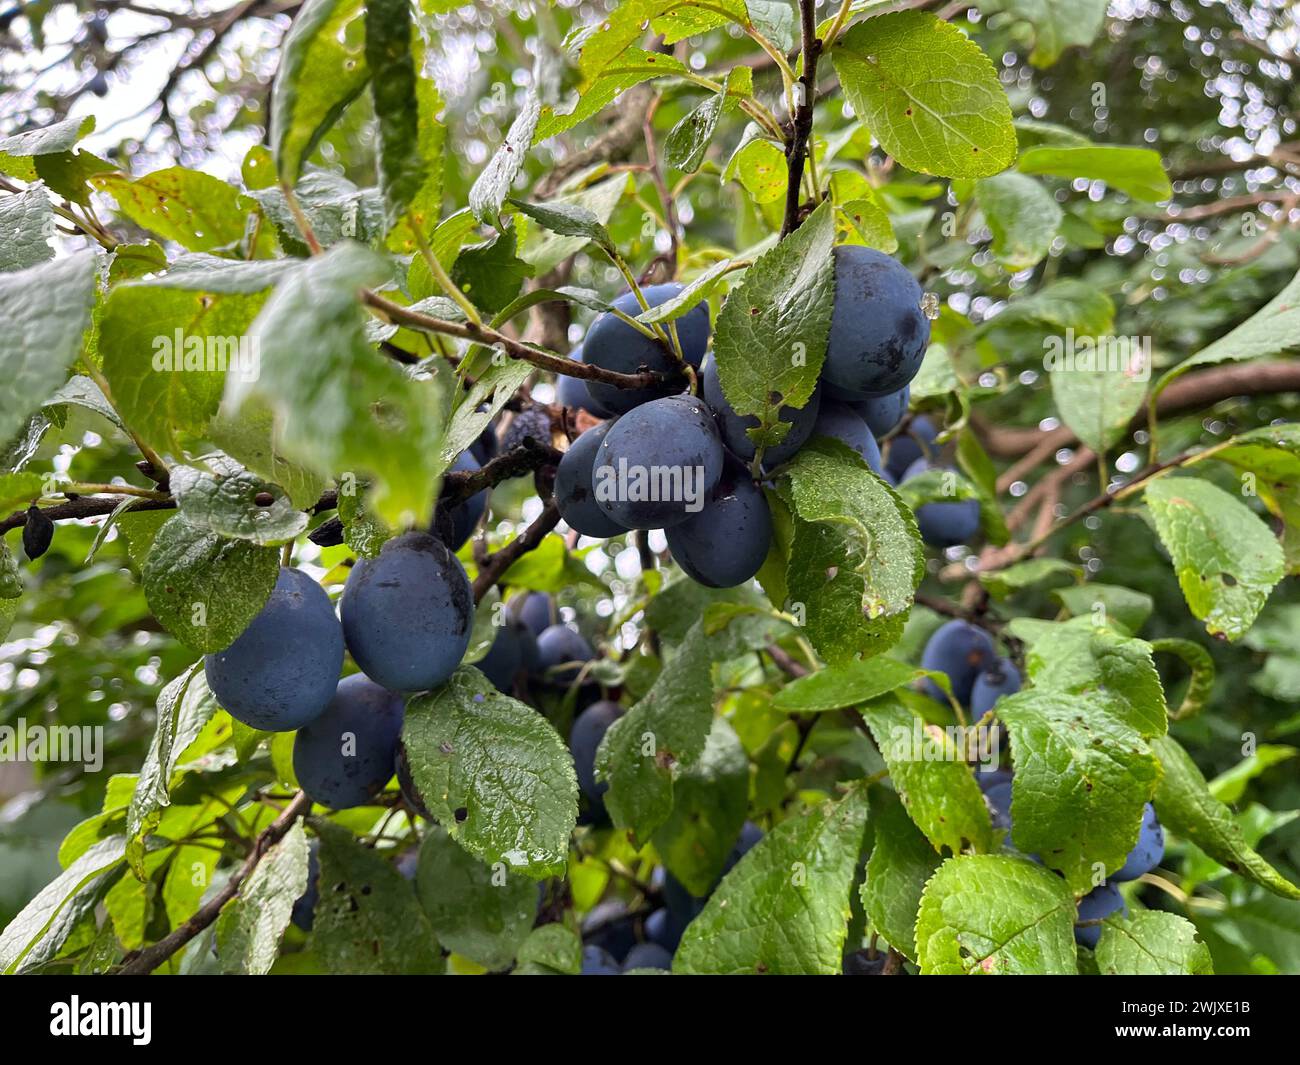 A cluster of ripe purple damson fruits growing on the tree branch. Viewed close up. Surrounded by green leaves. Suitable for a background. Stock Photo